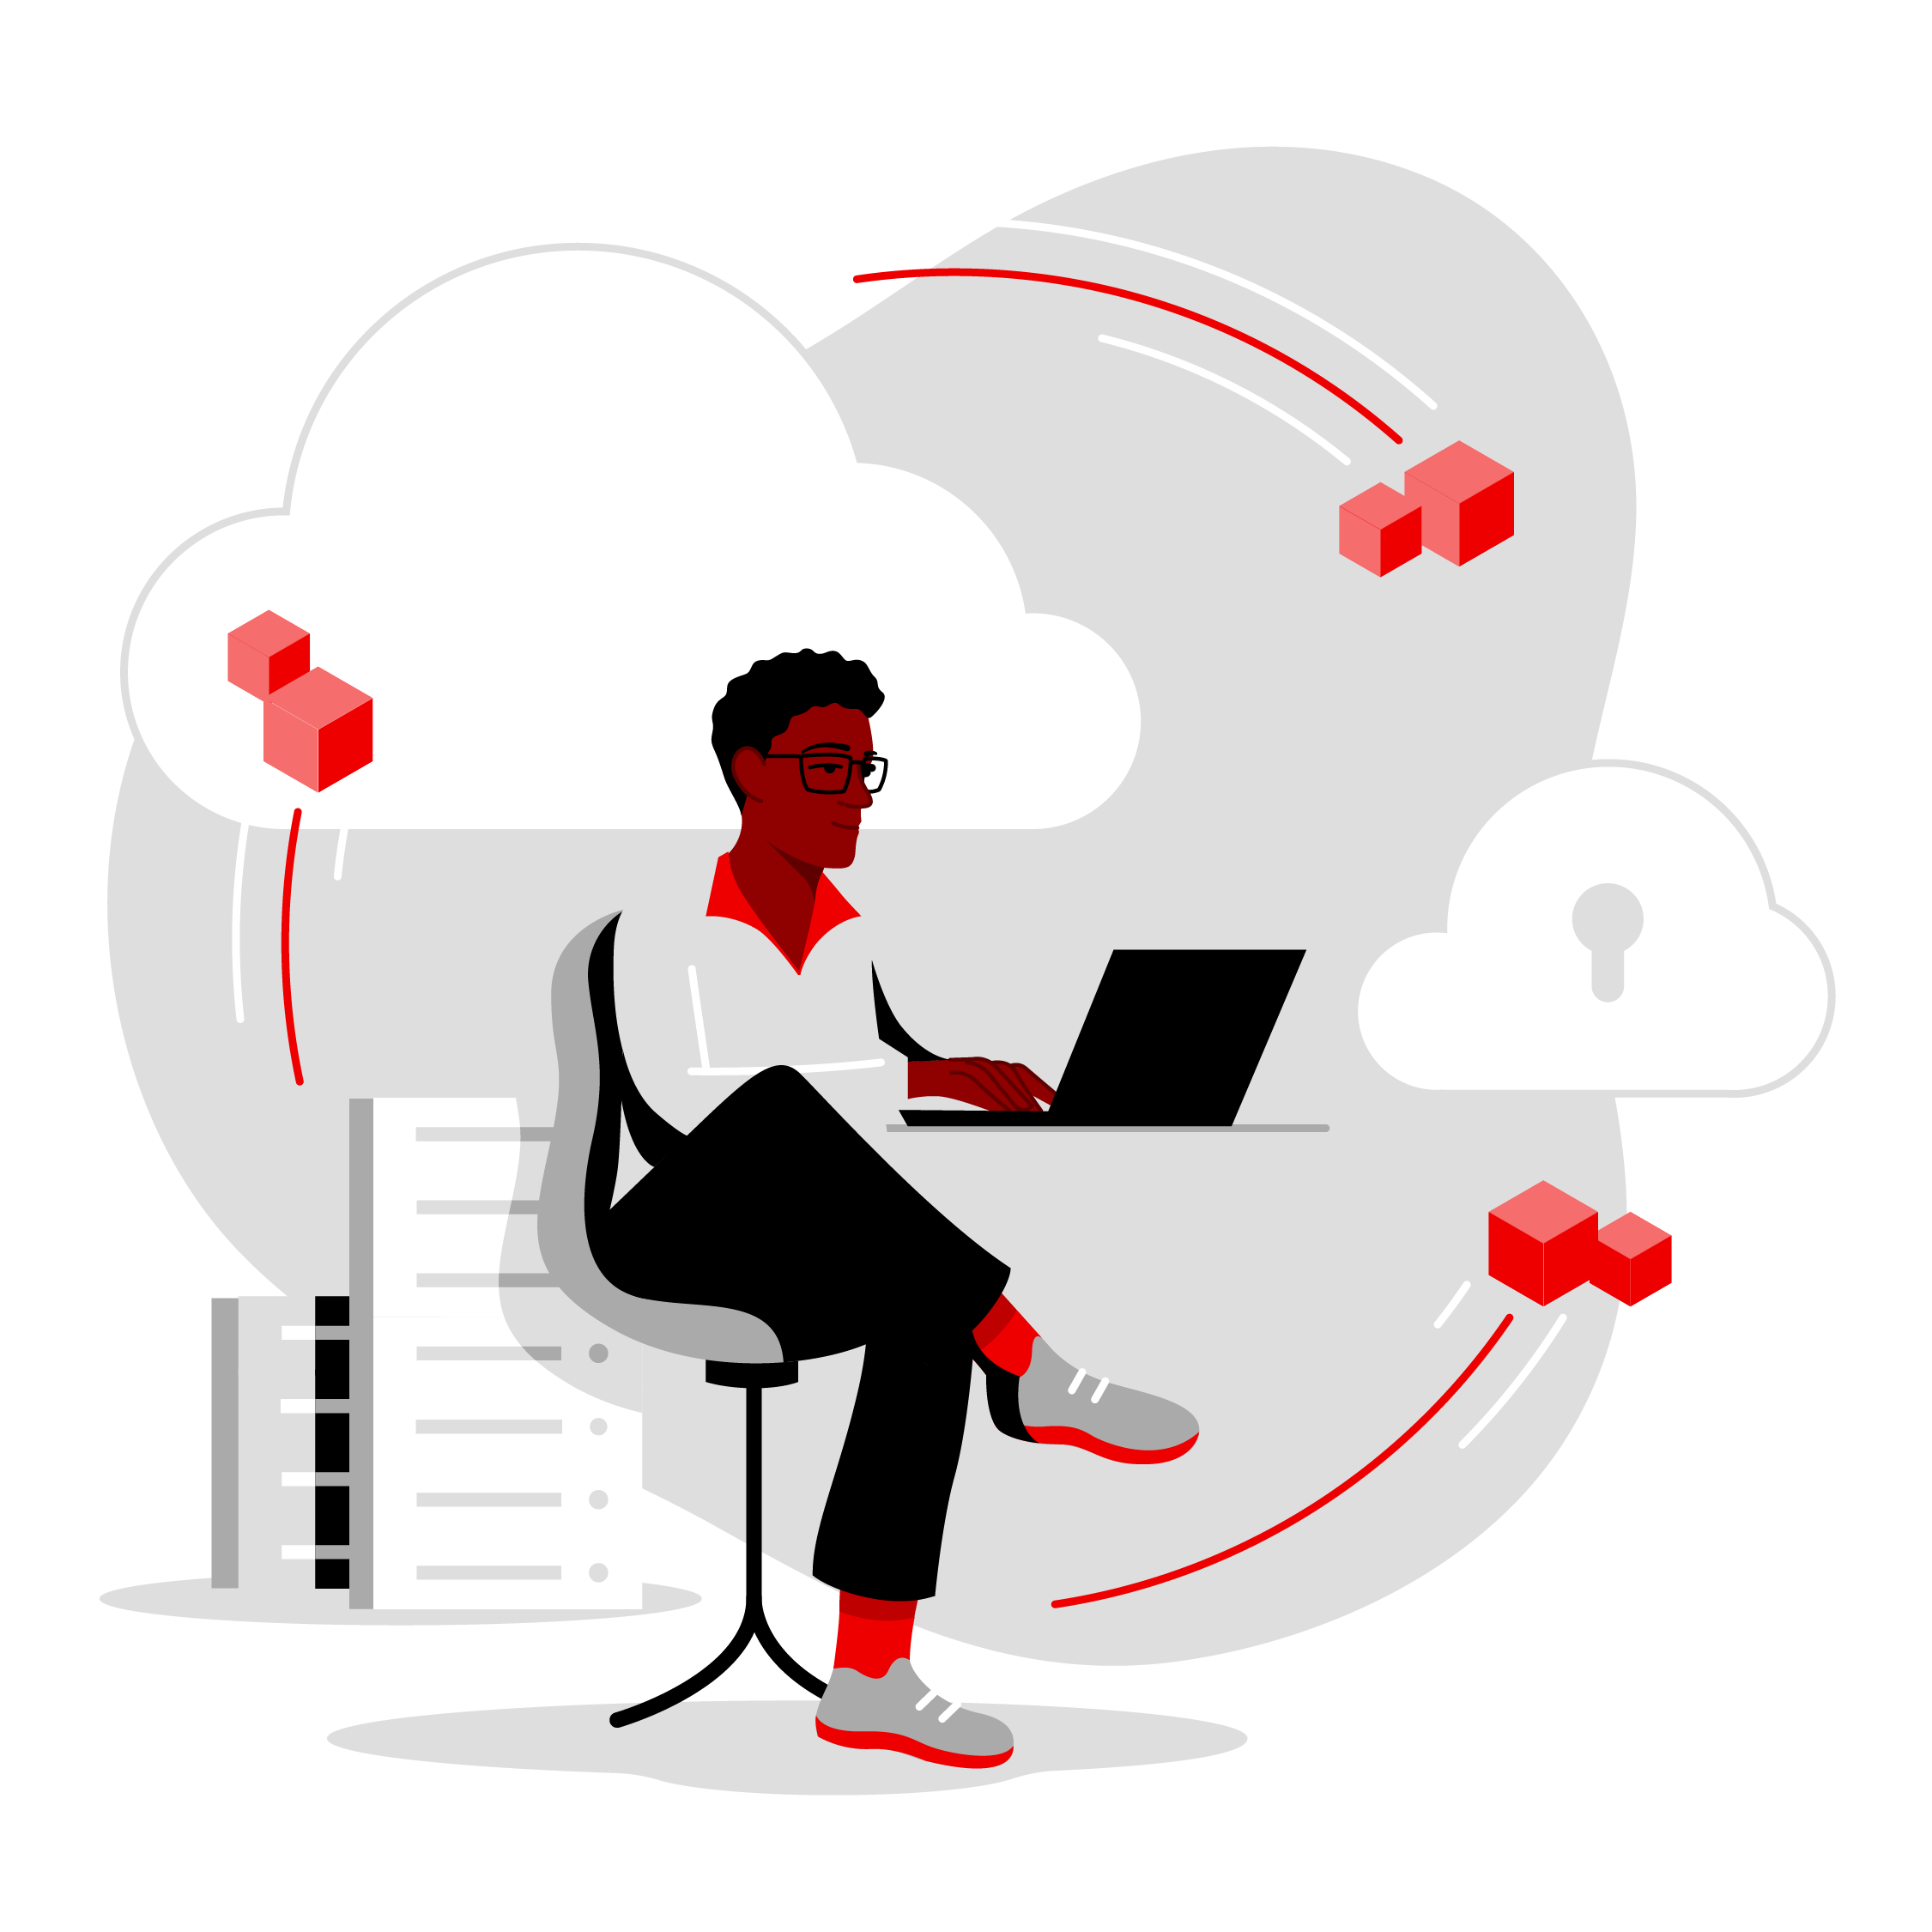 Open hybrid cloud technology illustration. Developer sits with a computer, the apps he is deploying are cubes that whirl around his head and the clouds